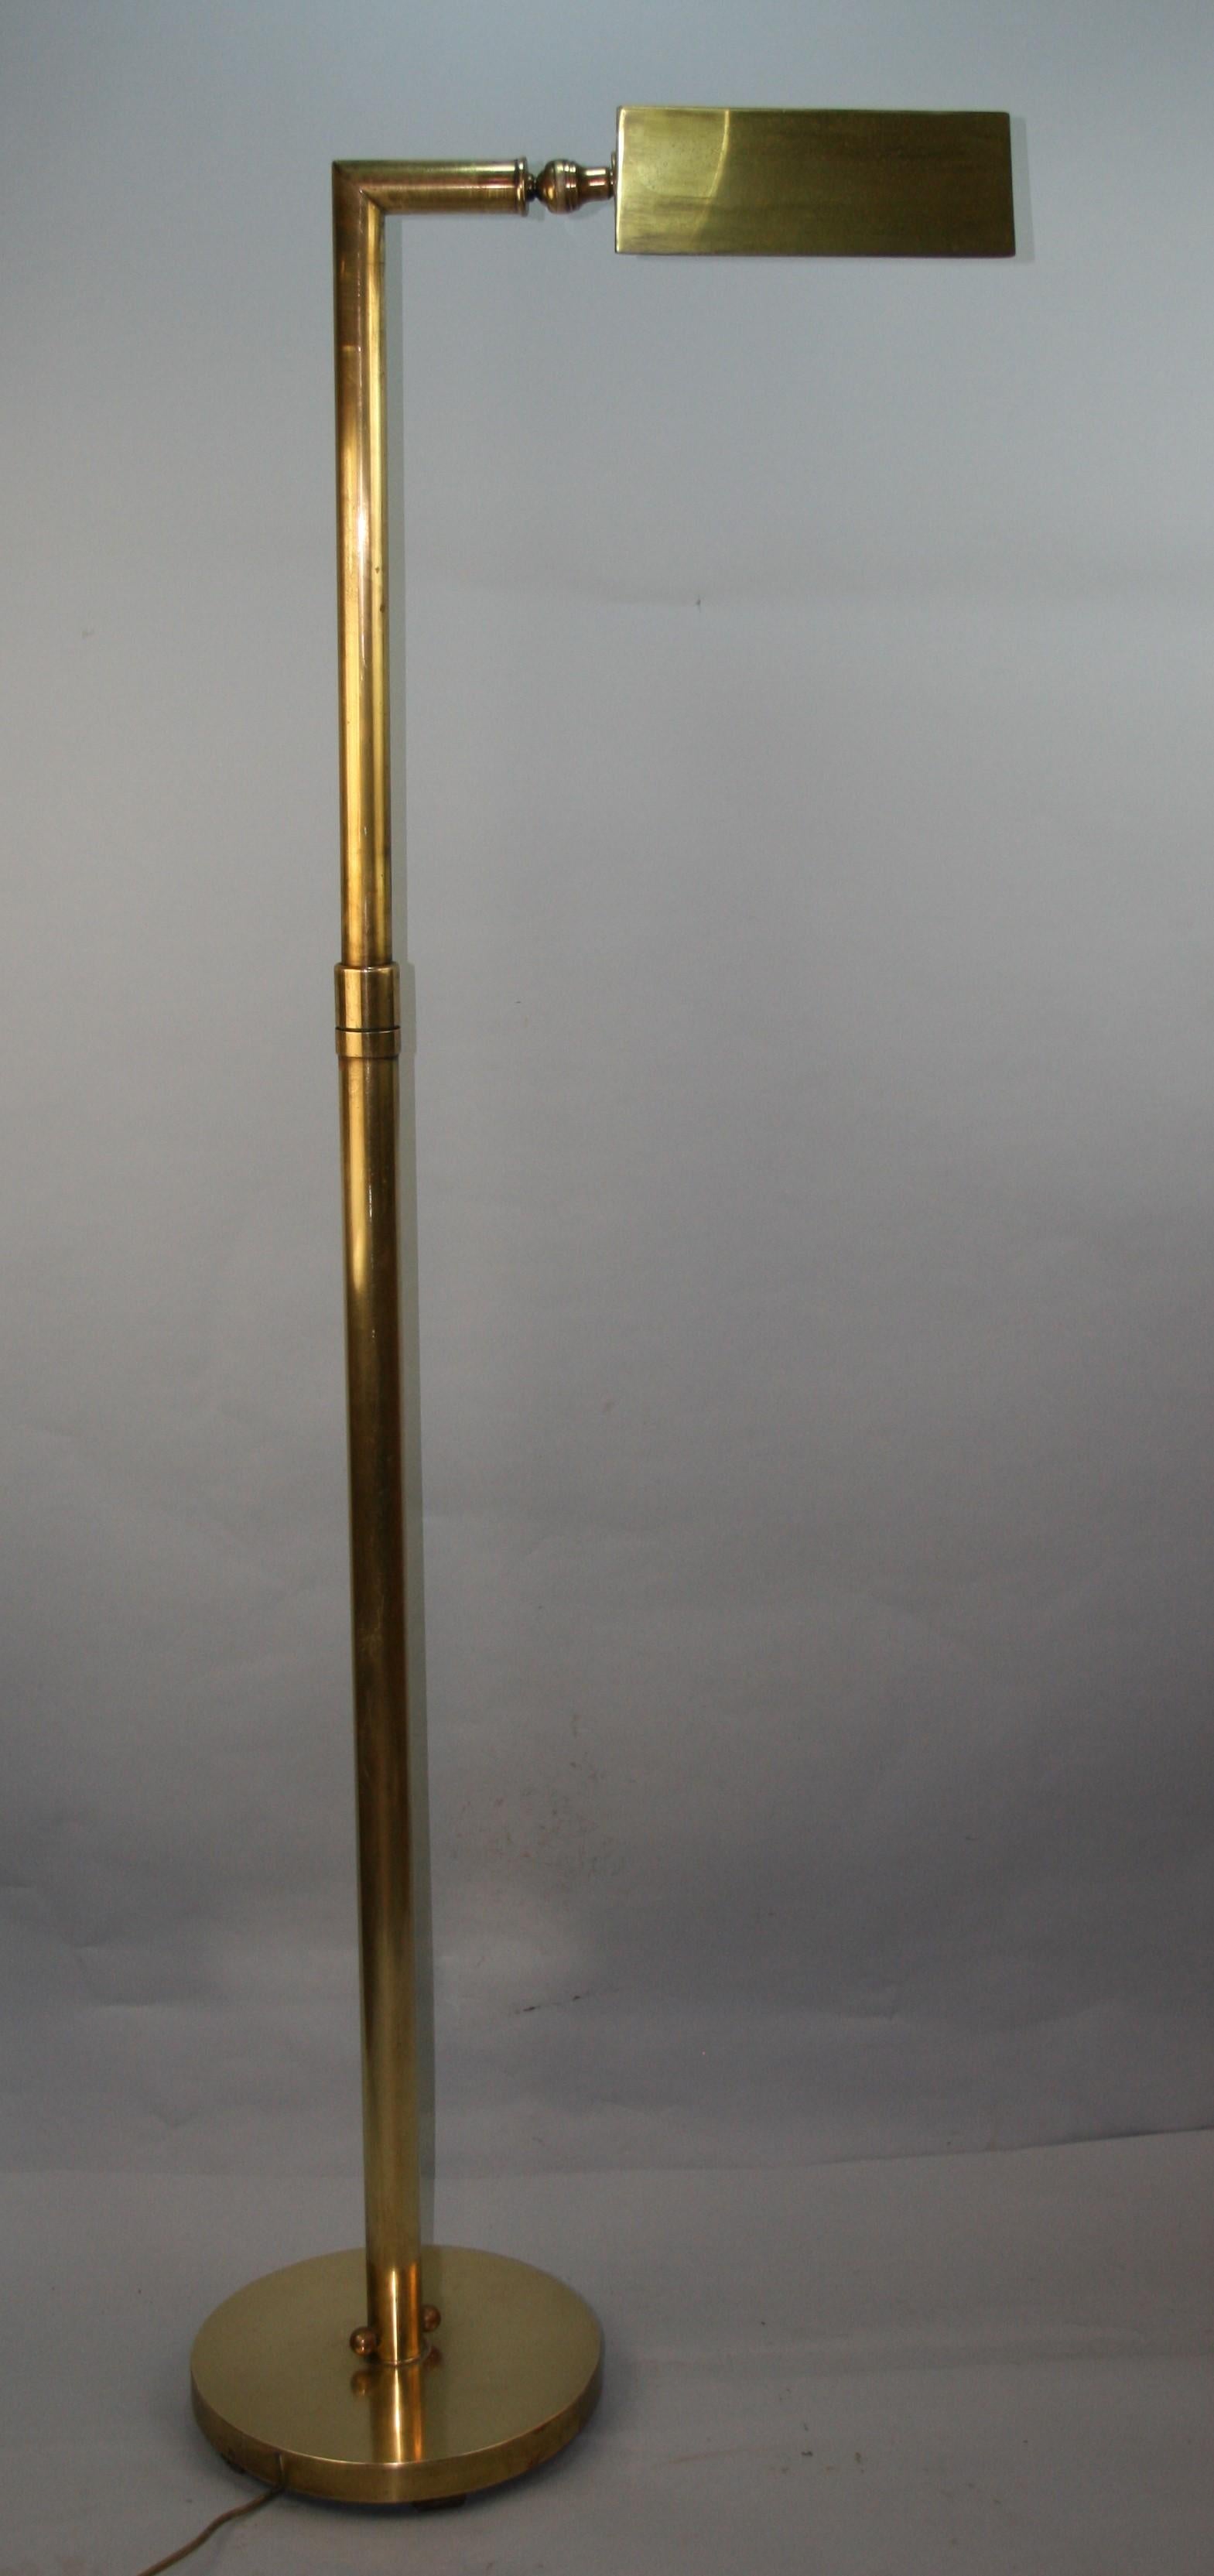 French brass adjustable floor lamp
Height and lamp housing are adjustable
Original wiring in working condition
11